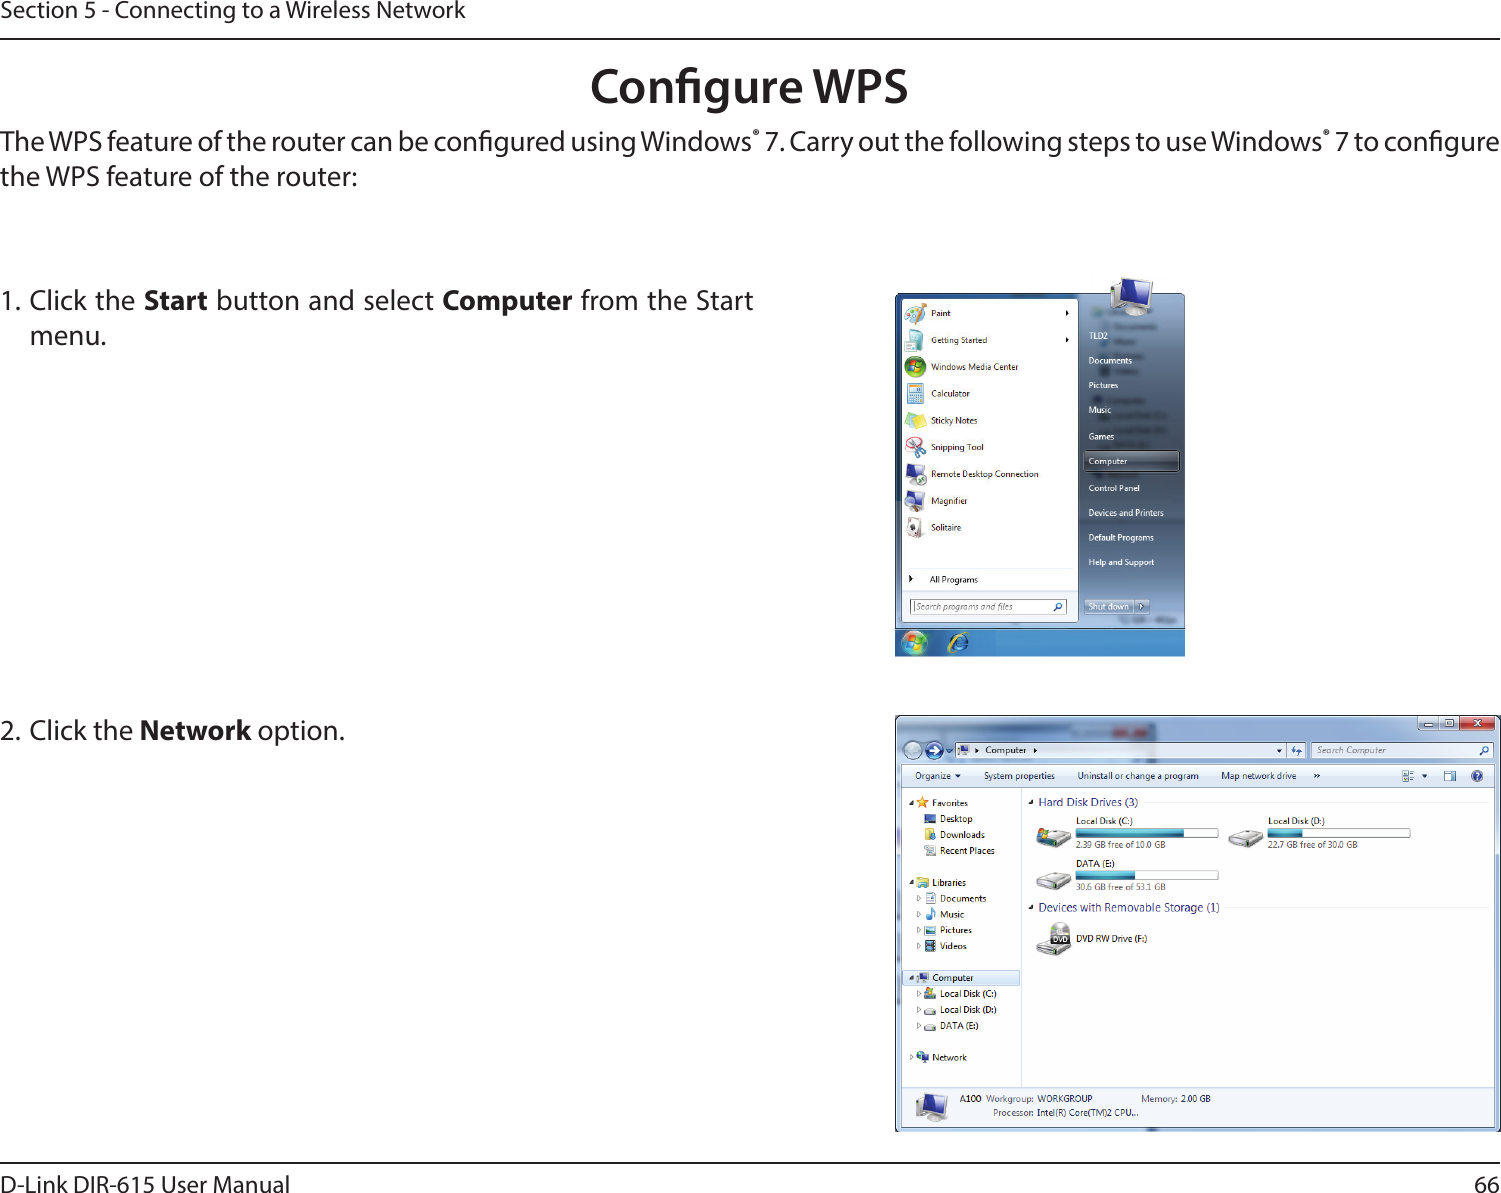 66D-Link DIR-615 User ManualSection 5 - Connecting to a Wireless NetworkCongure WPSThe WPS feature of the router can be congured using Windows® 7. Carry out the following steps to use Windows® 7 to congure the WPS feature of the router:1. Click the Start button and select Computer from the Start menu.2. Click the Network option.